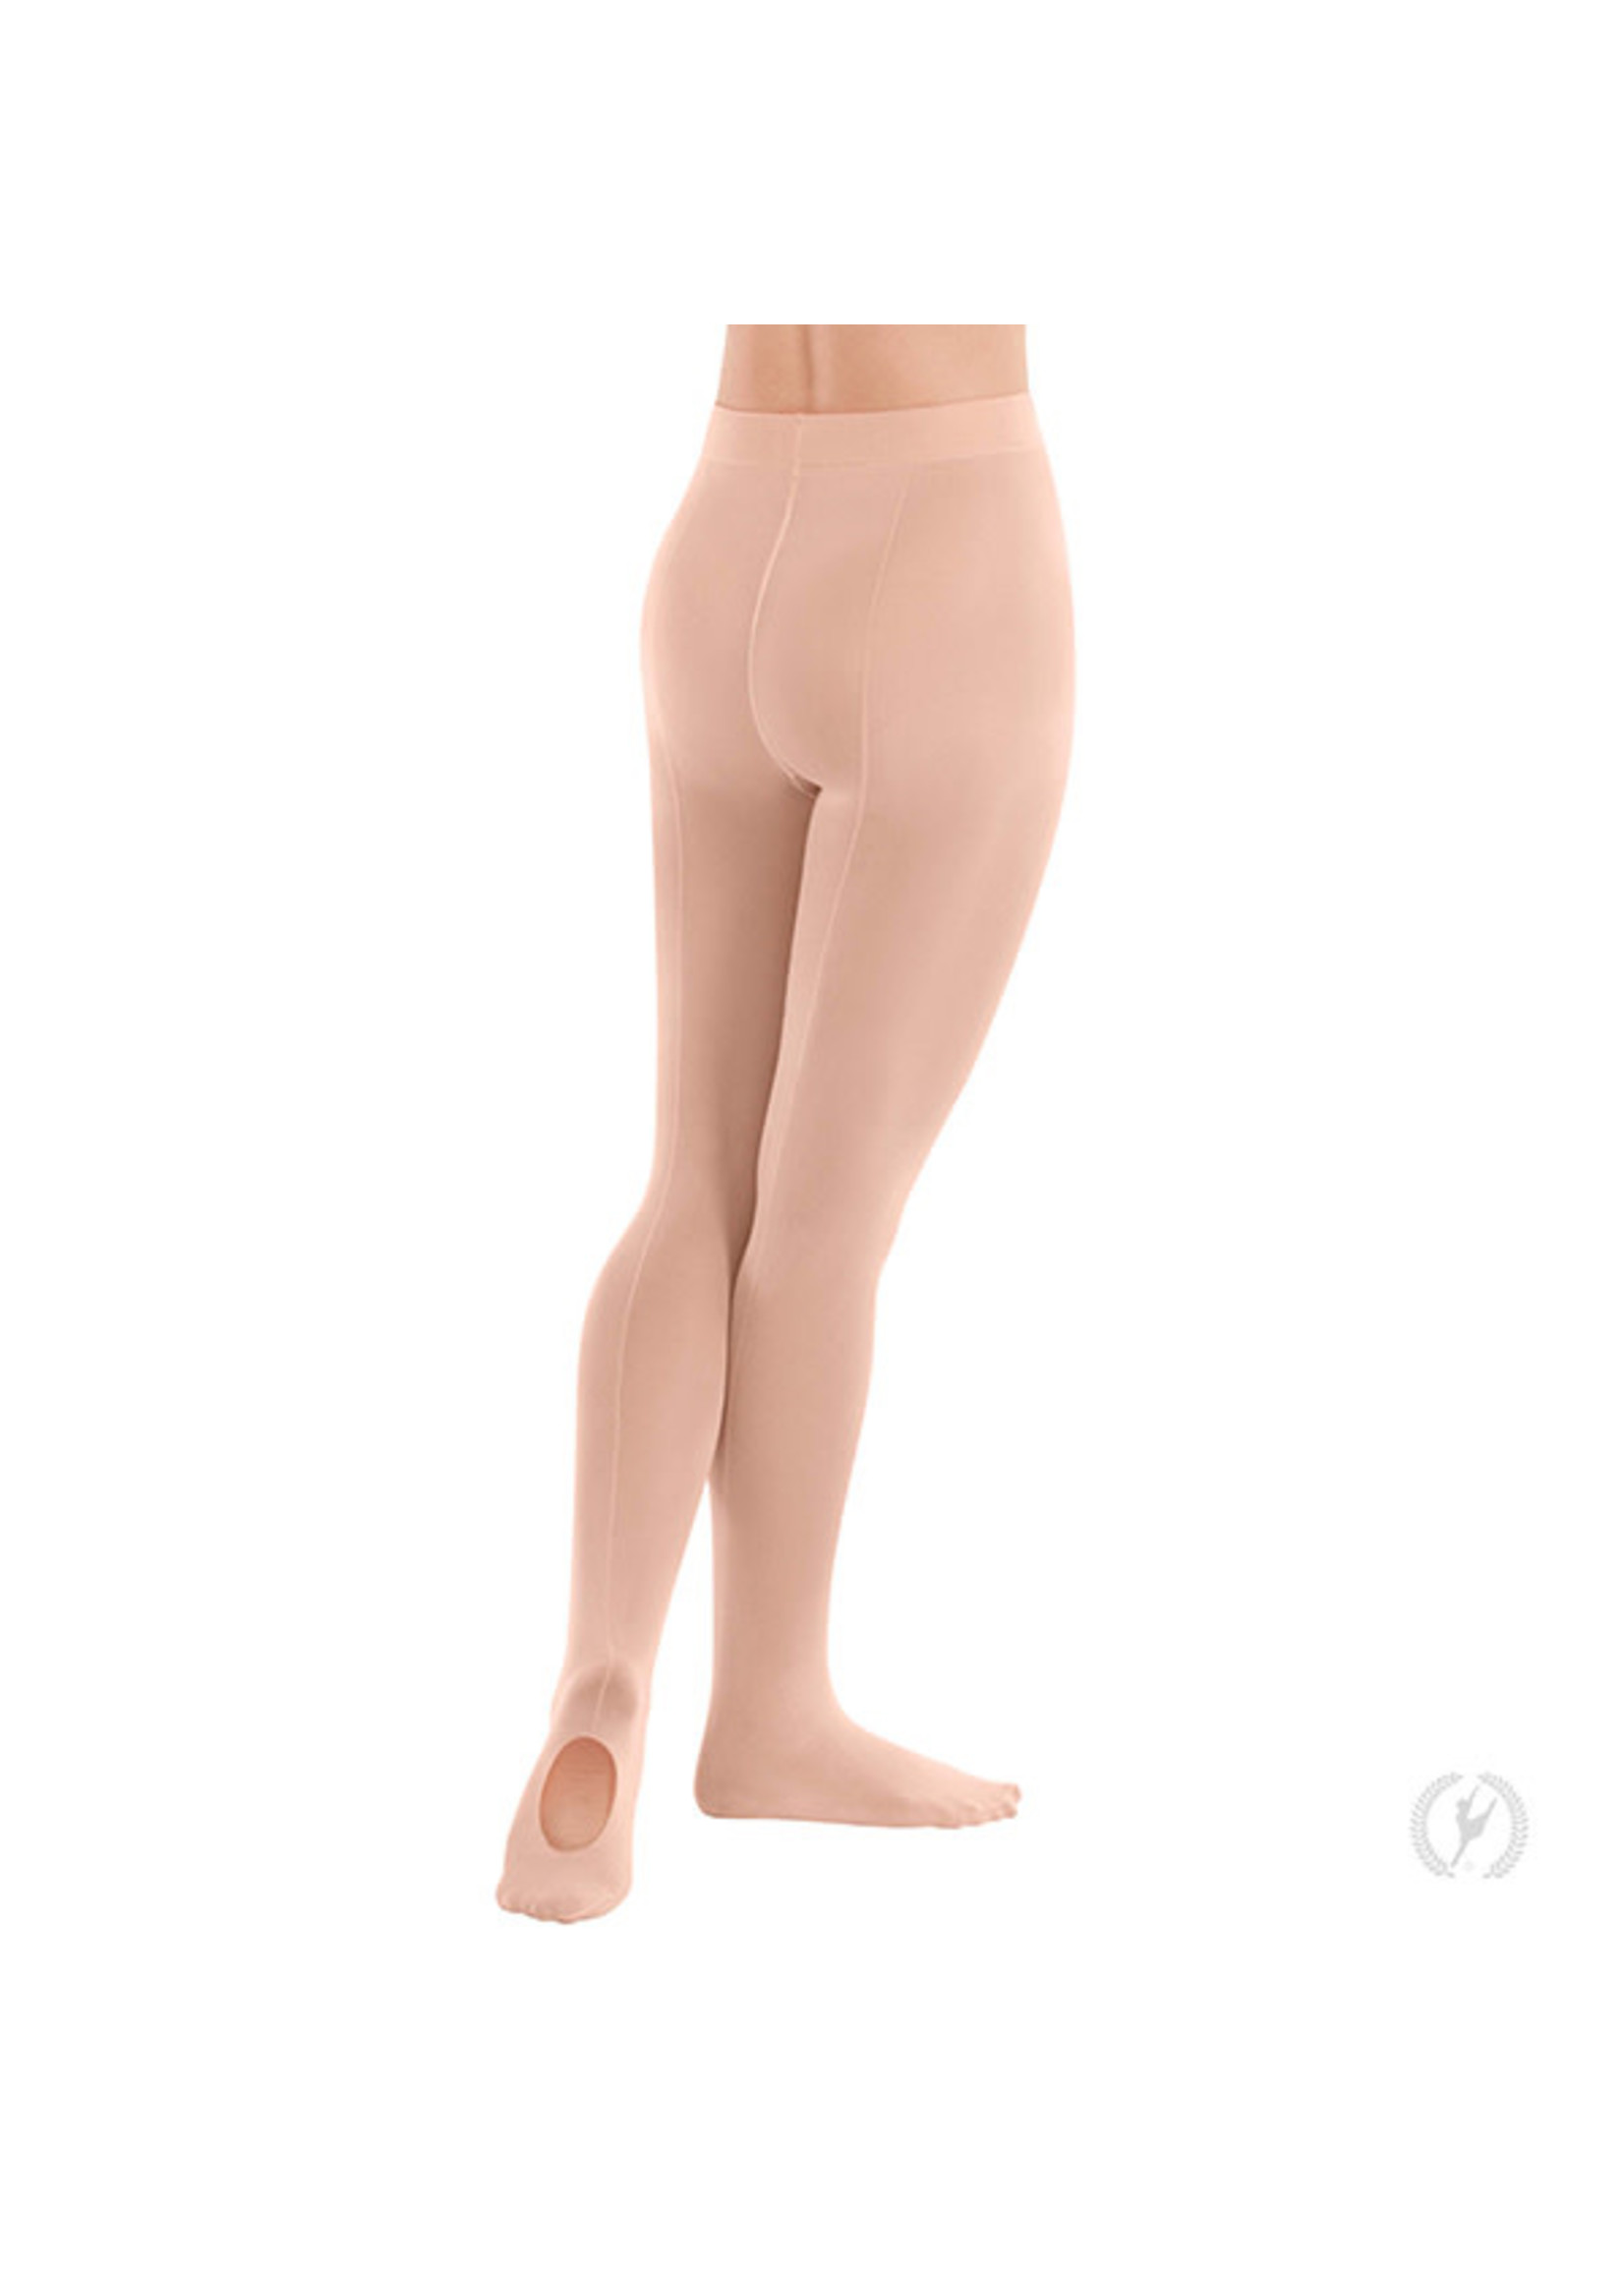 ET Convertible Mock Back Seam Tights with Soft Knit Waistband